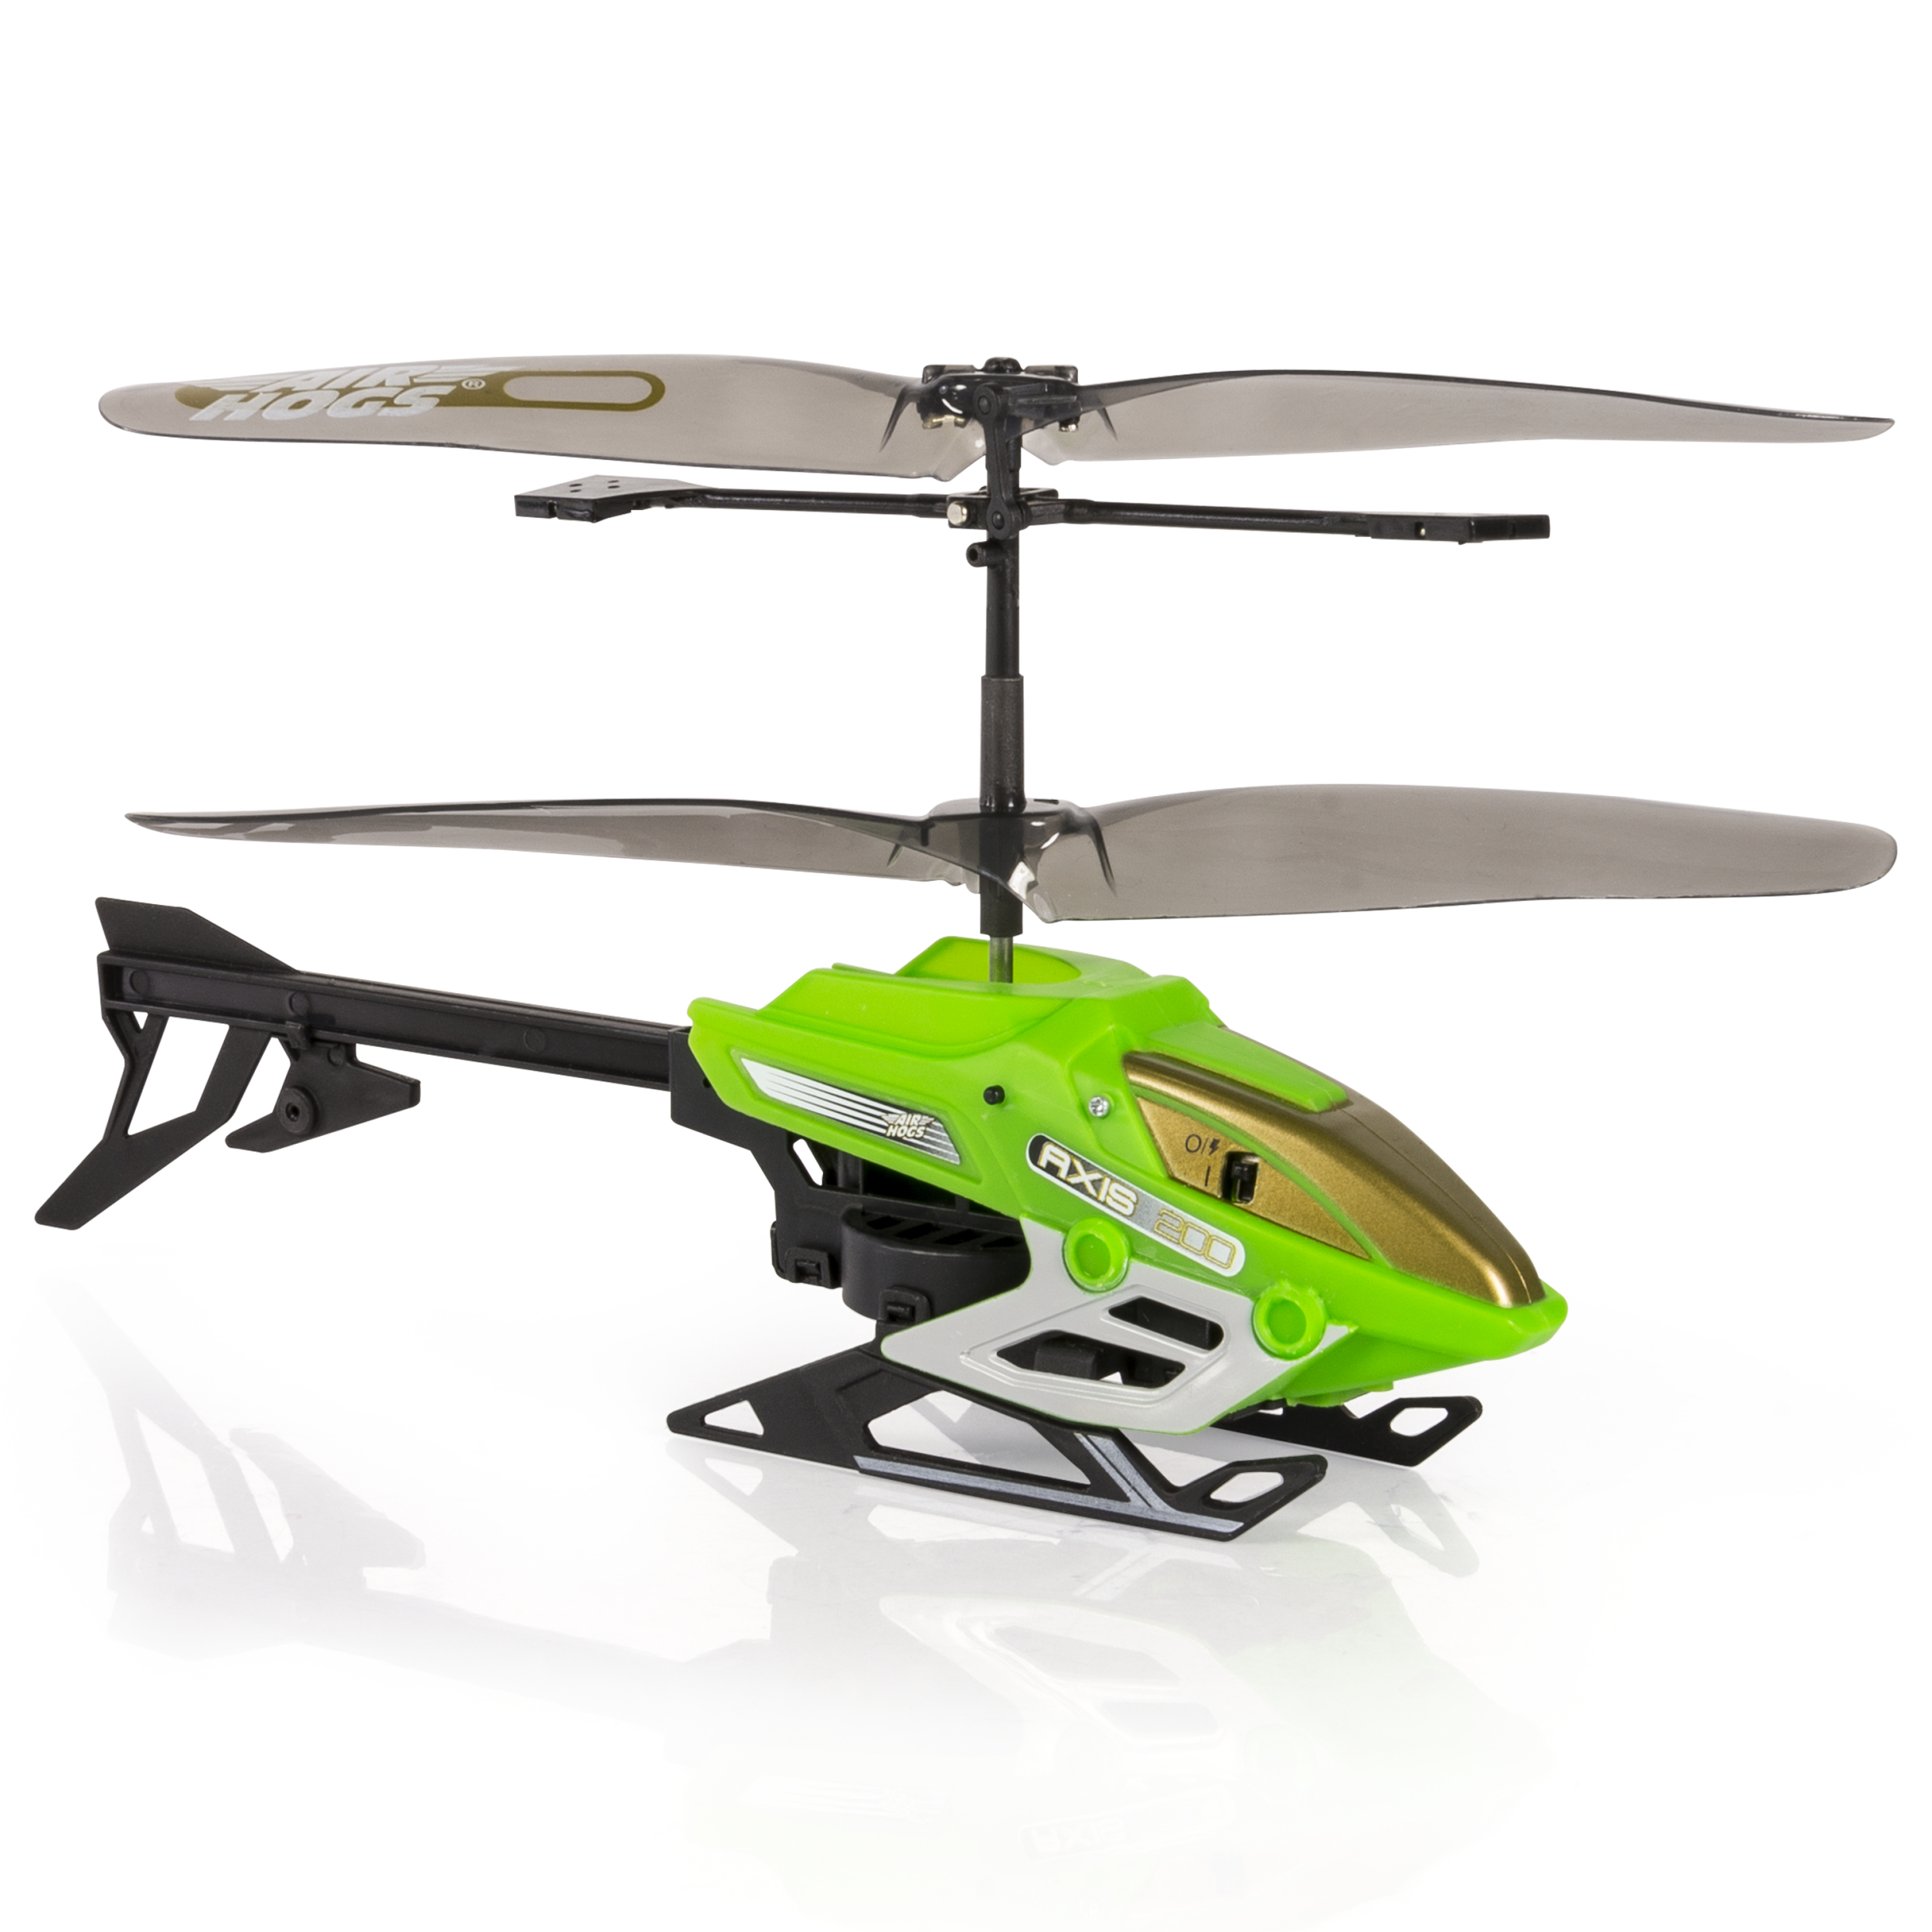 Air Hogs Axis 200 R/C Helicopter with Batteries, Green - image 4 of 6